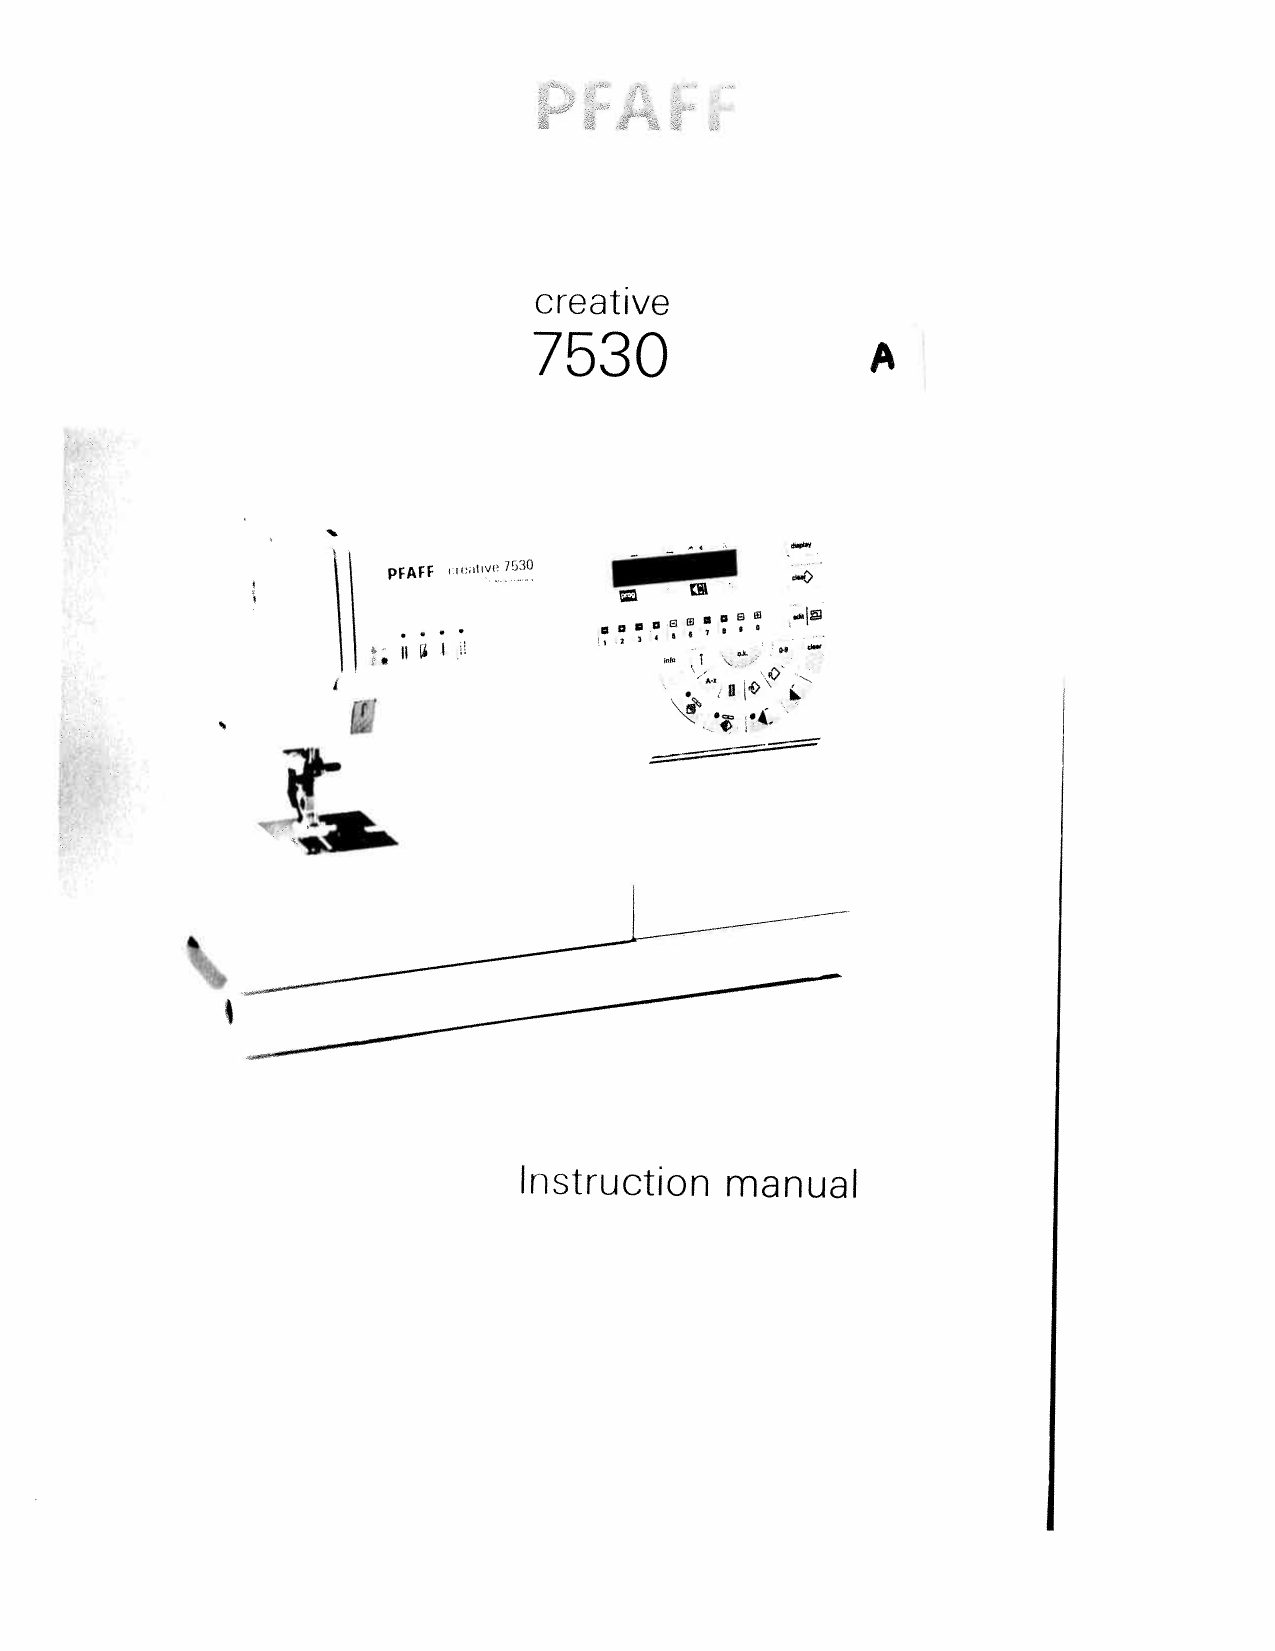 Pfaff Creative 7530 instruction manual Preview image 6